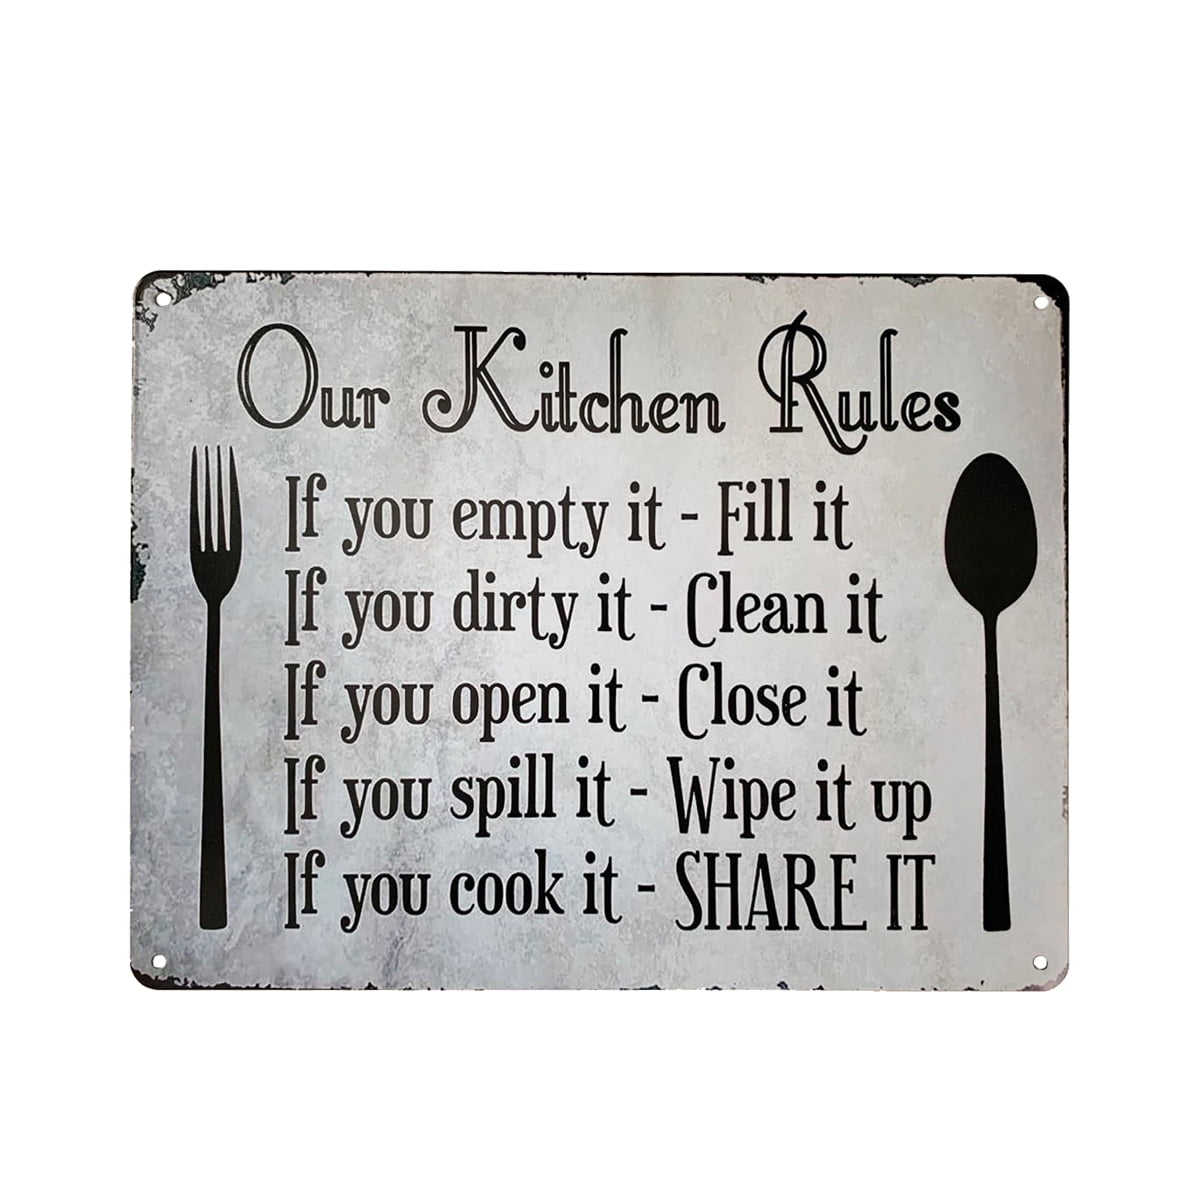 KITCHEN RULES METAL WALL SIGN PLAQUE